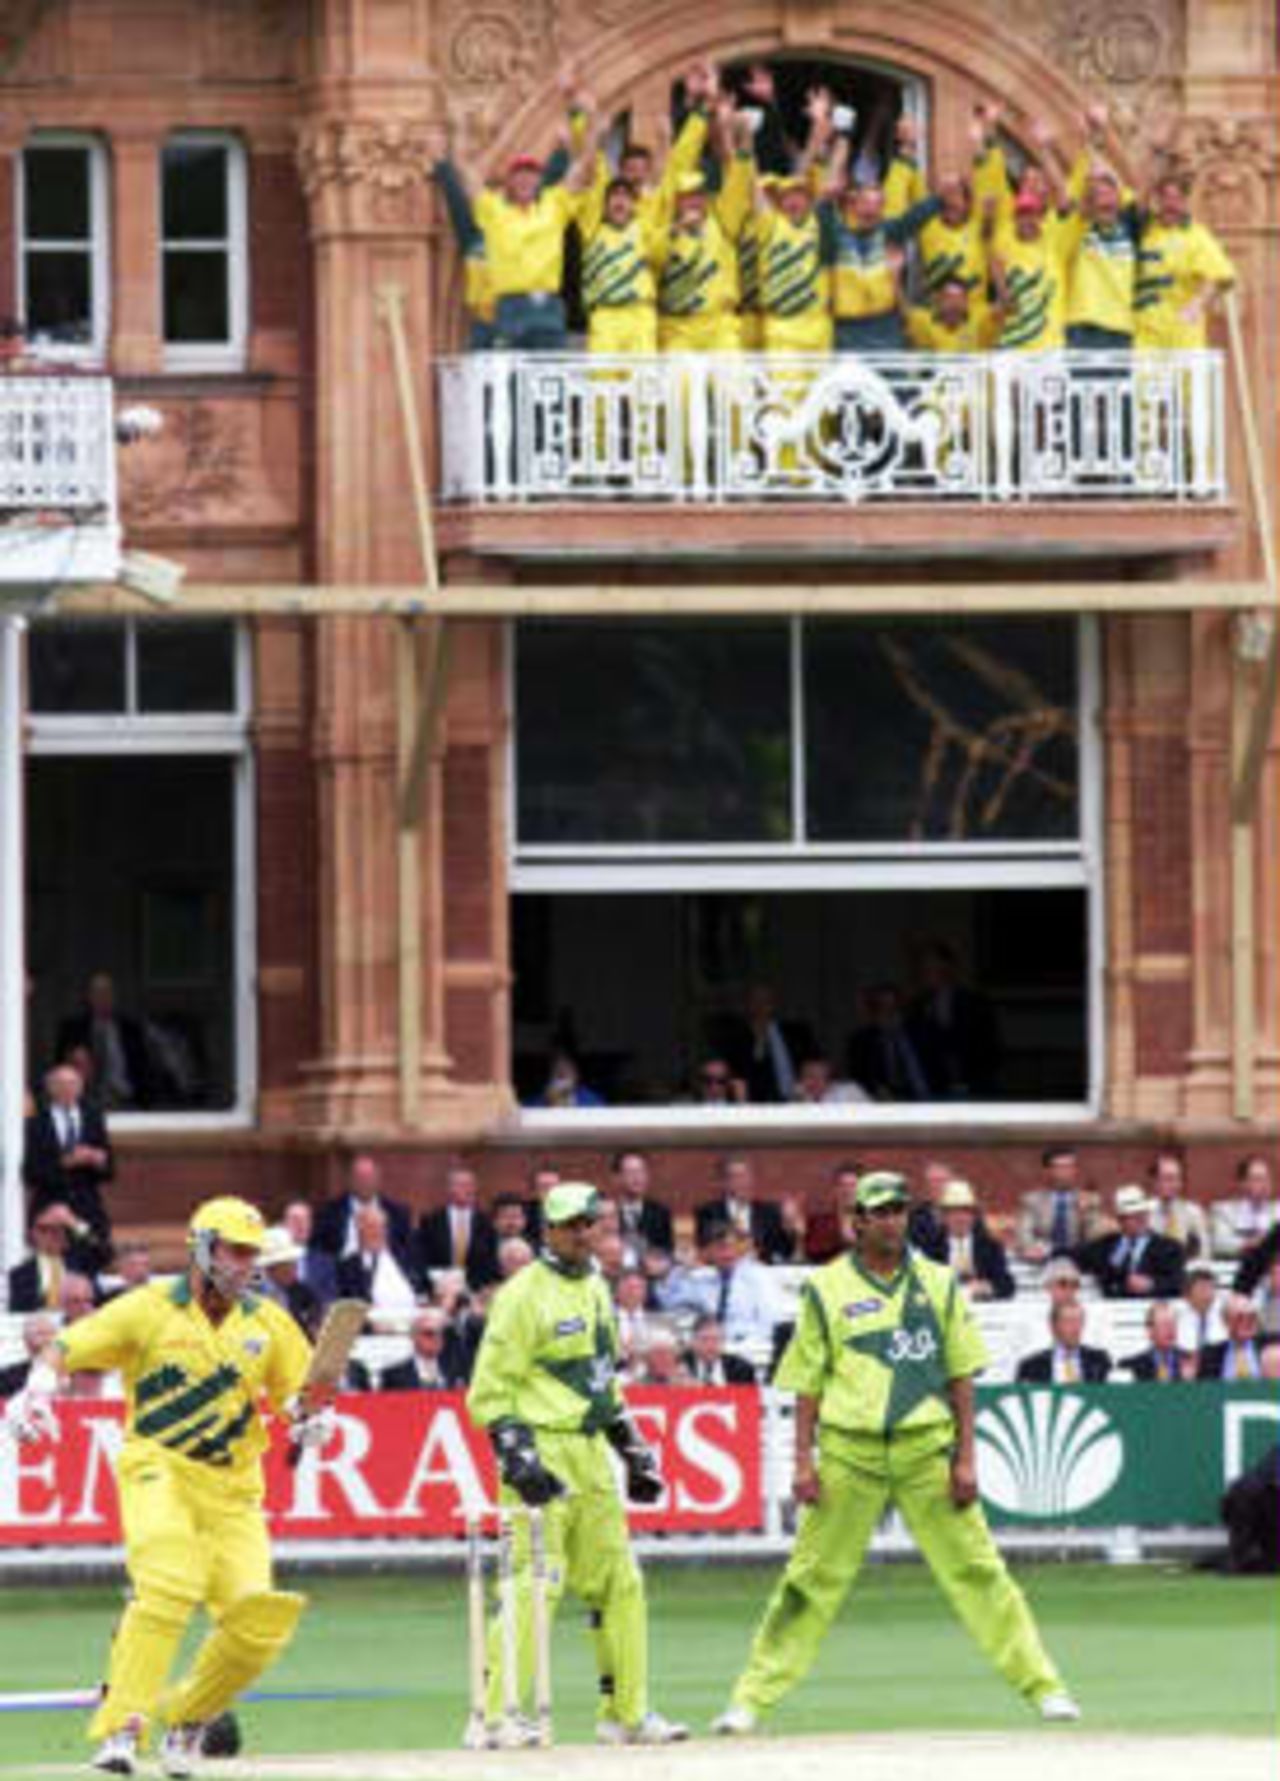 Australia`s cricket team celebrate from their dressing room balcony as the winning runs are scored against Pakistan in the World Cup final at Lords in London. Australia won by eight wickets. 20 June 1999.